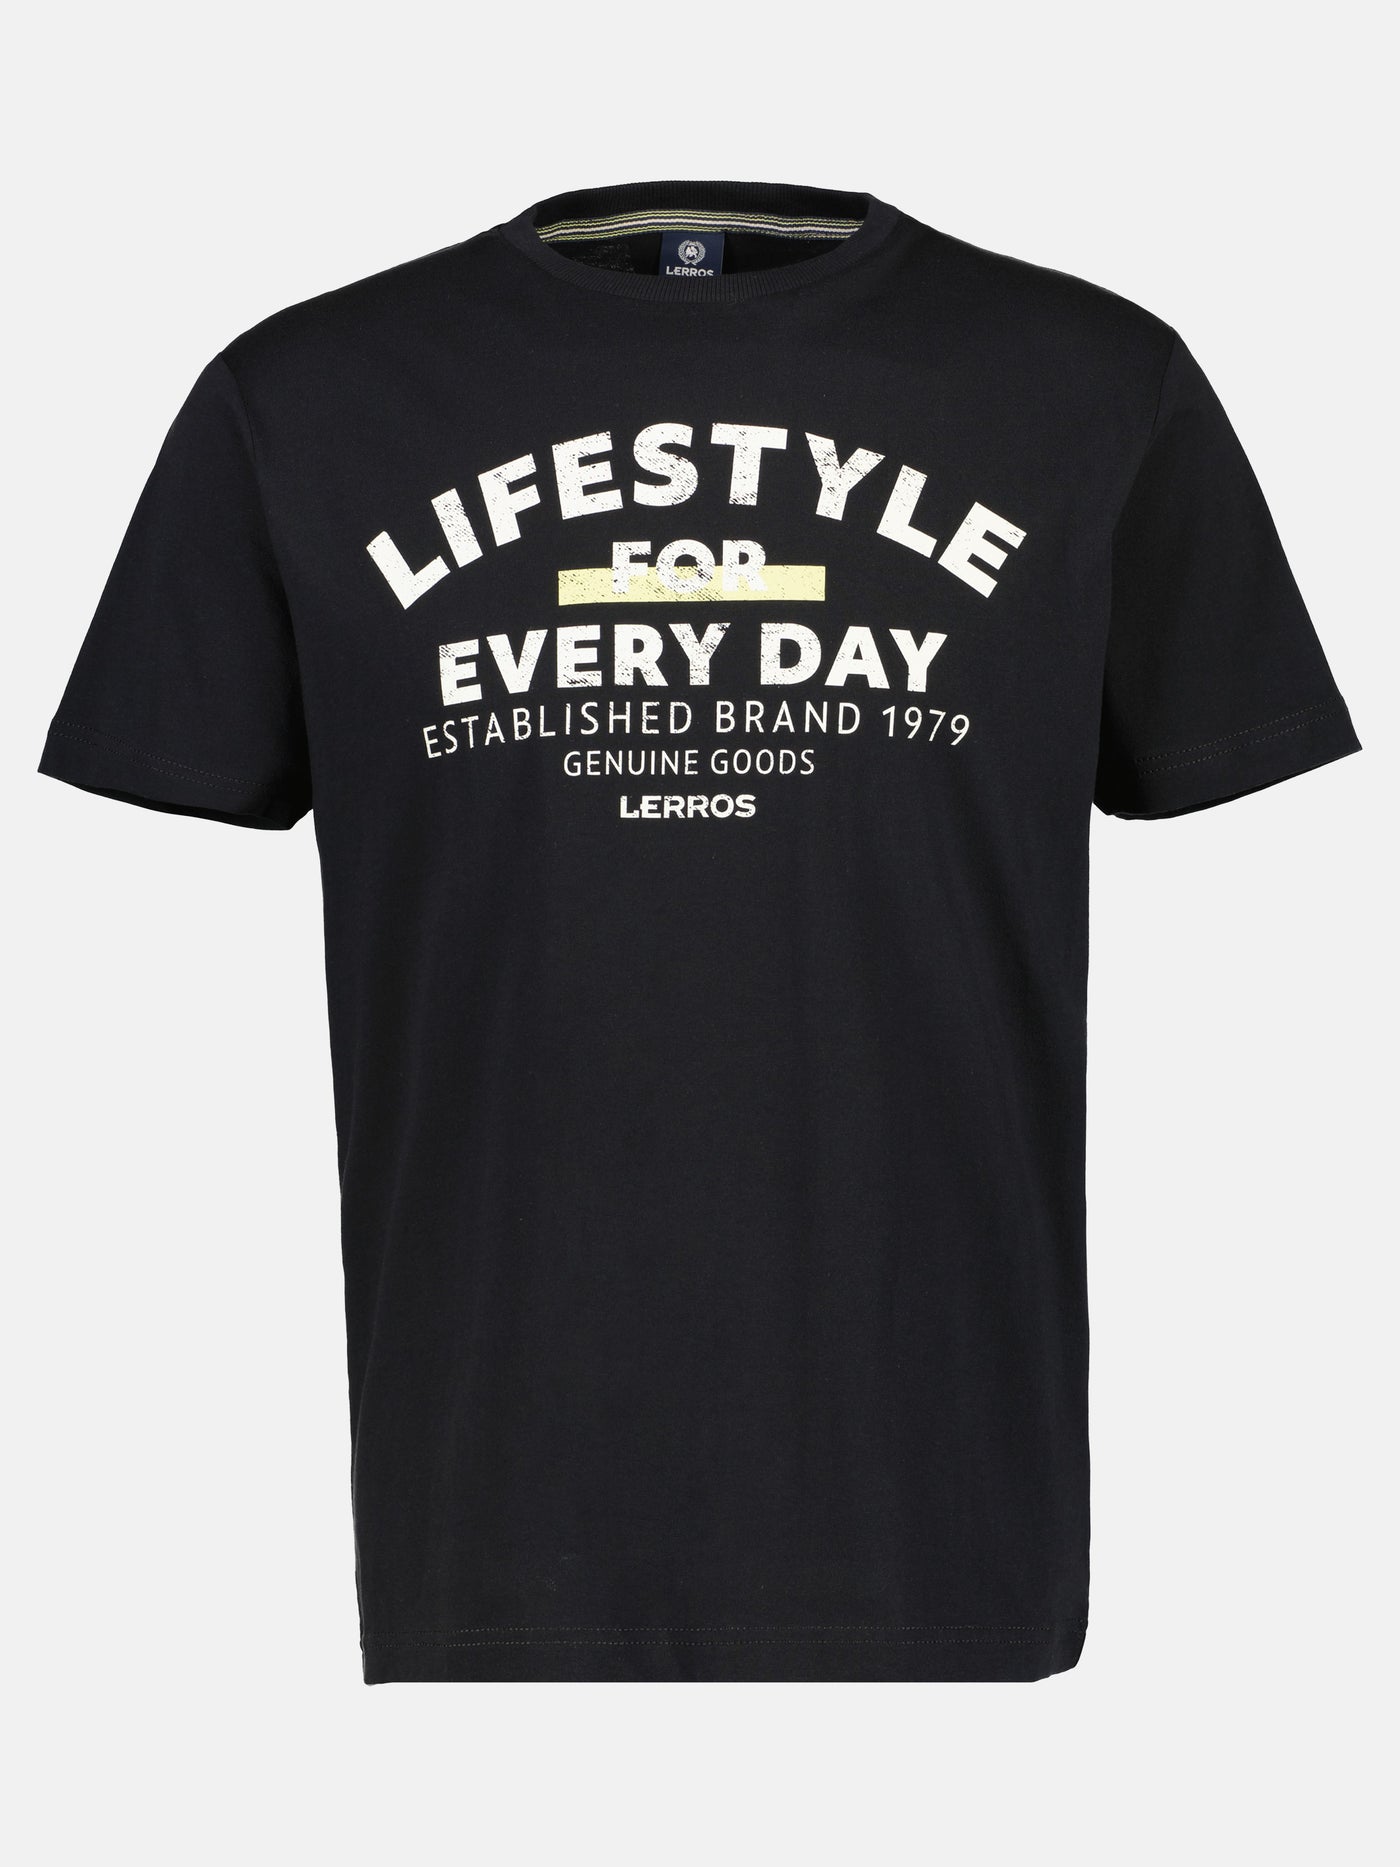 SHOP day* LERROS *Lifestyle – for T-Shirt every